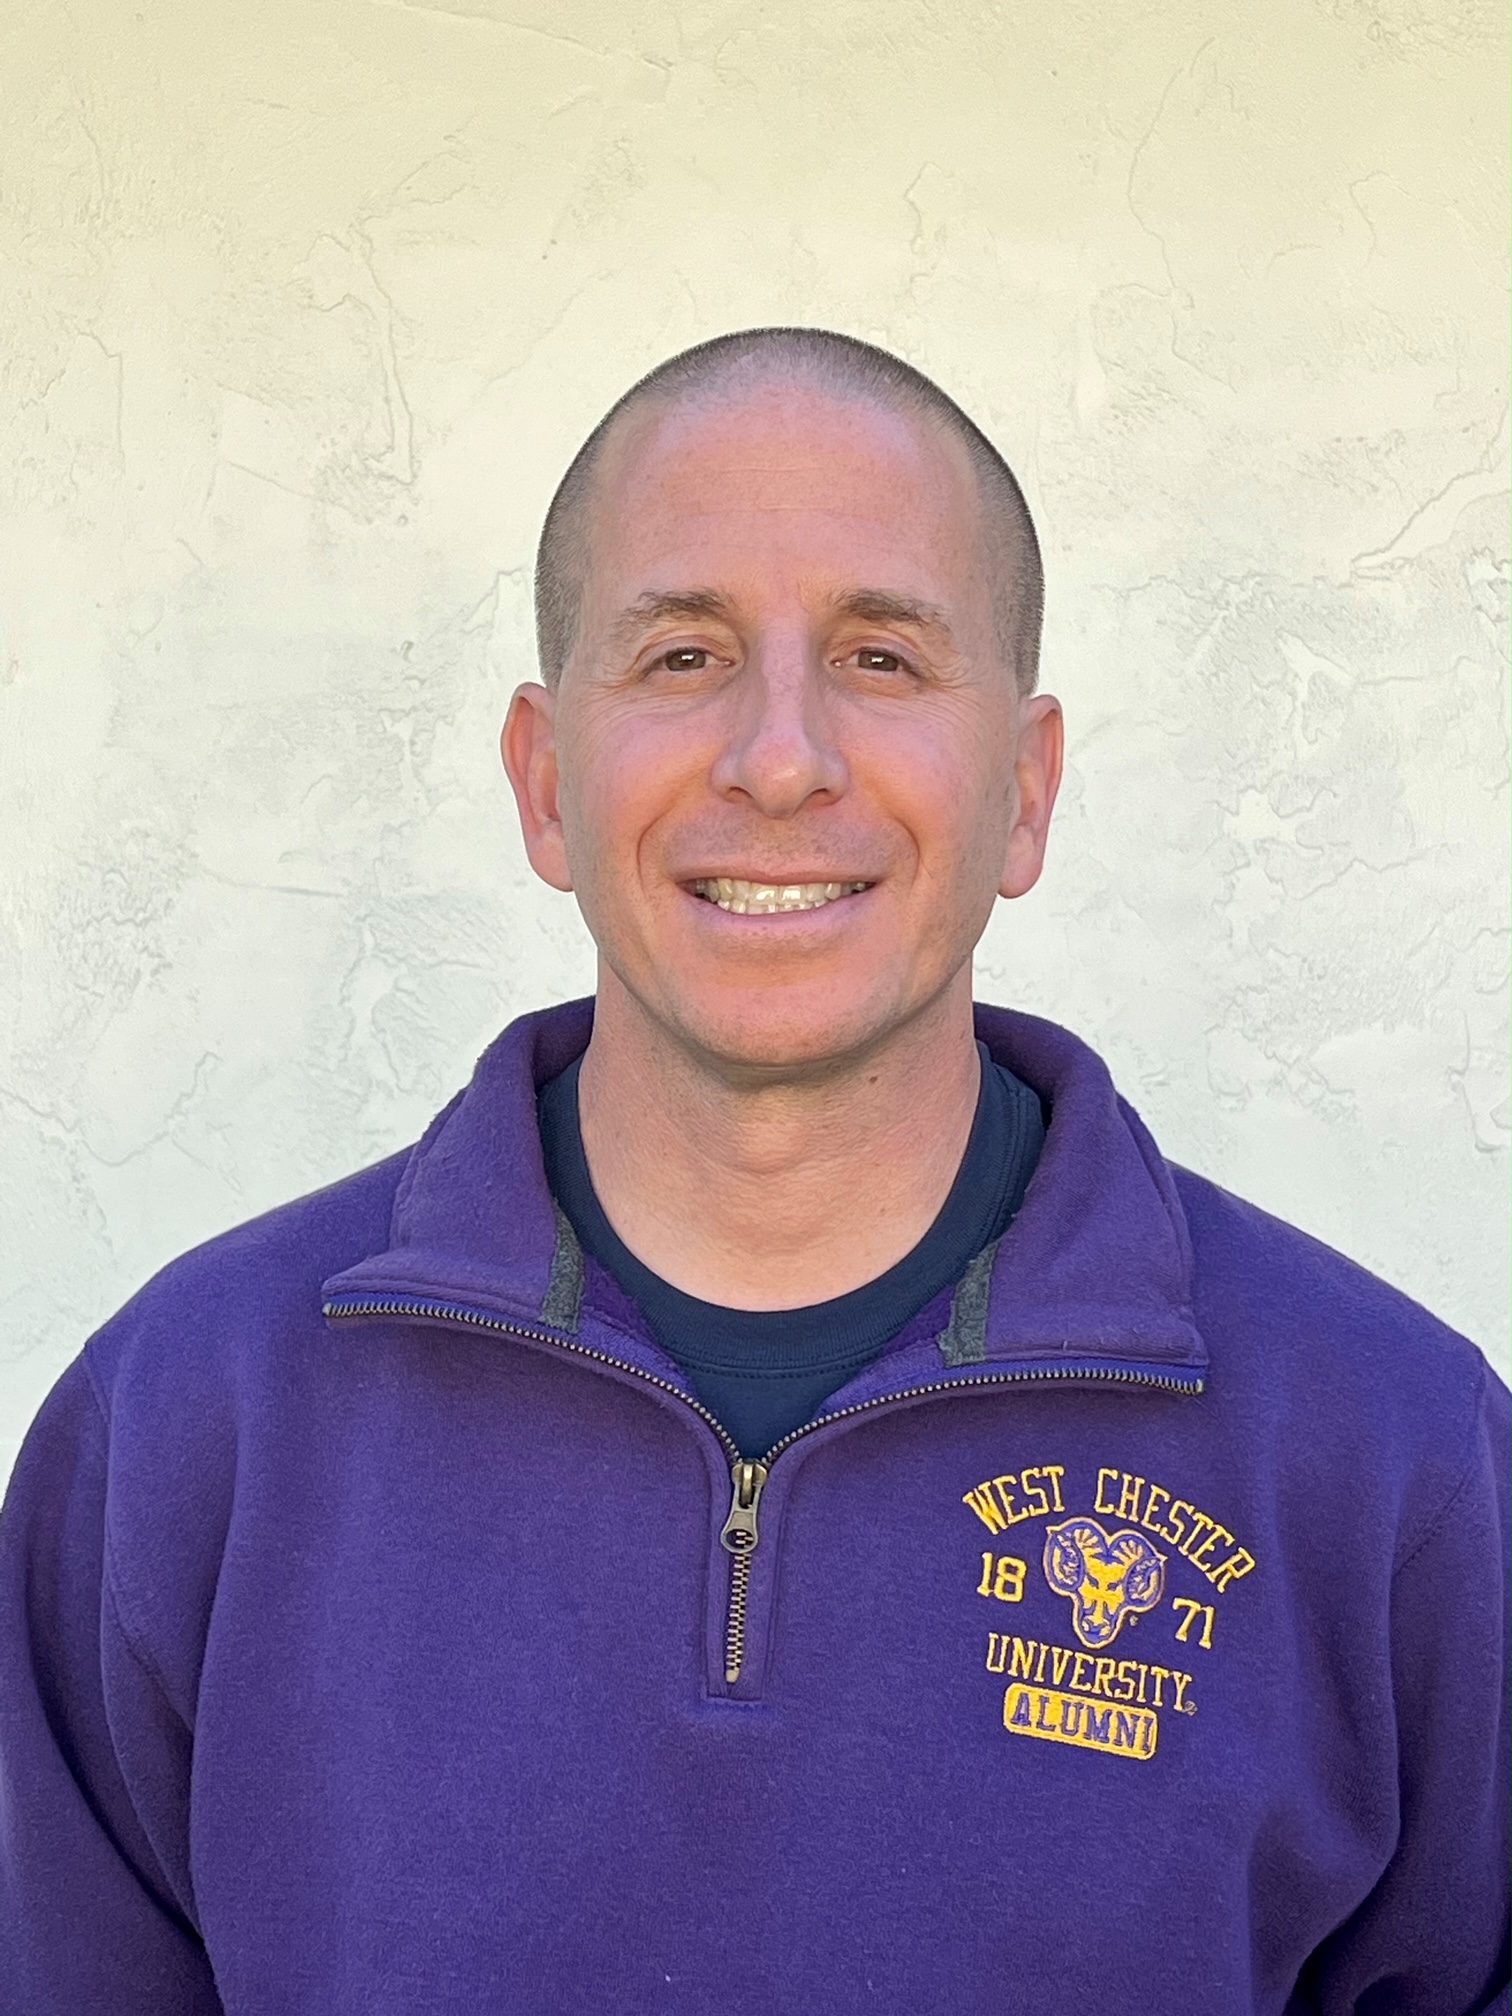 Dr. Hirsch's picture with a purple sweater and smiling